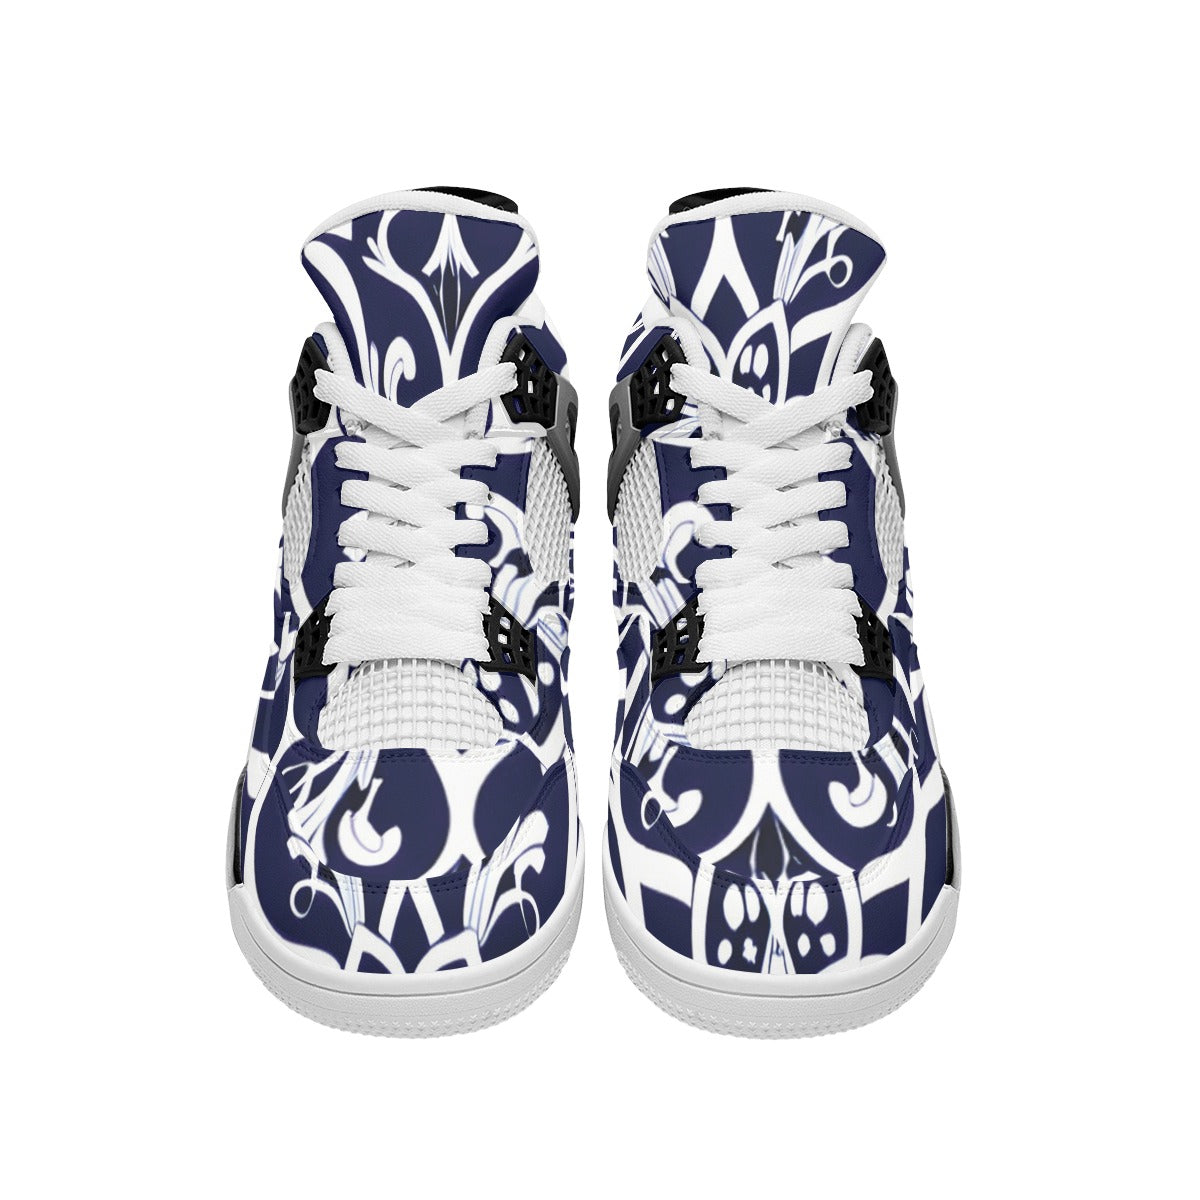 OUPE "Women's Air" Basketball Shoes